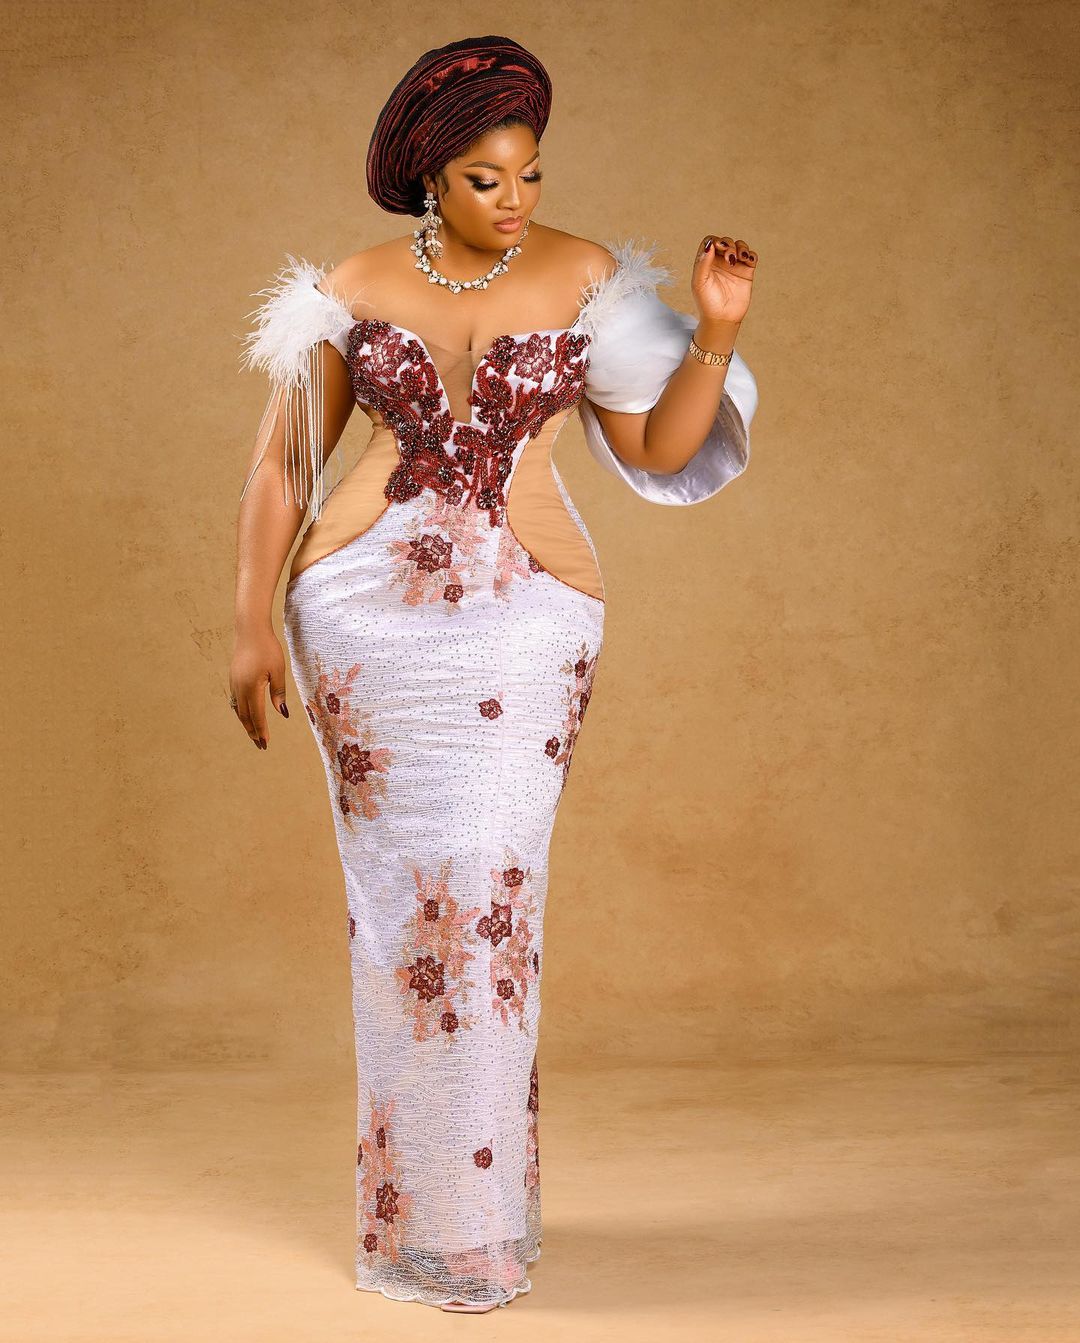 Omotola Jalade- Looking Stunning And Ready To Party